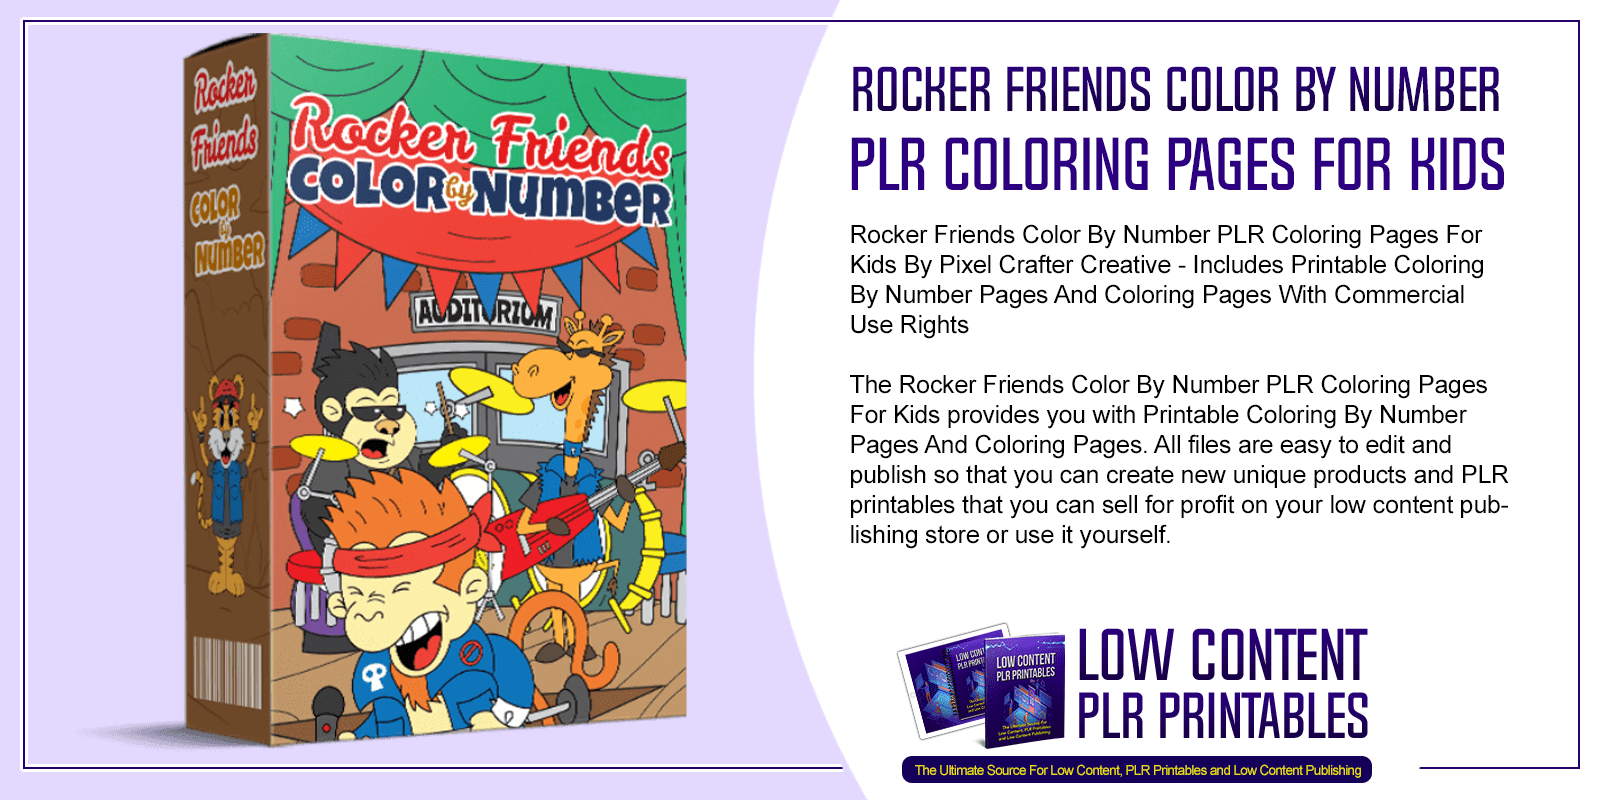 Rocker Friends Color By Number PLR Coloring Pages For Kids